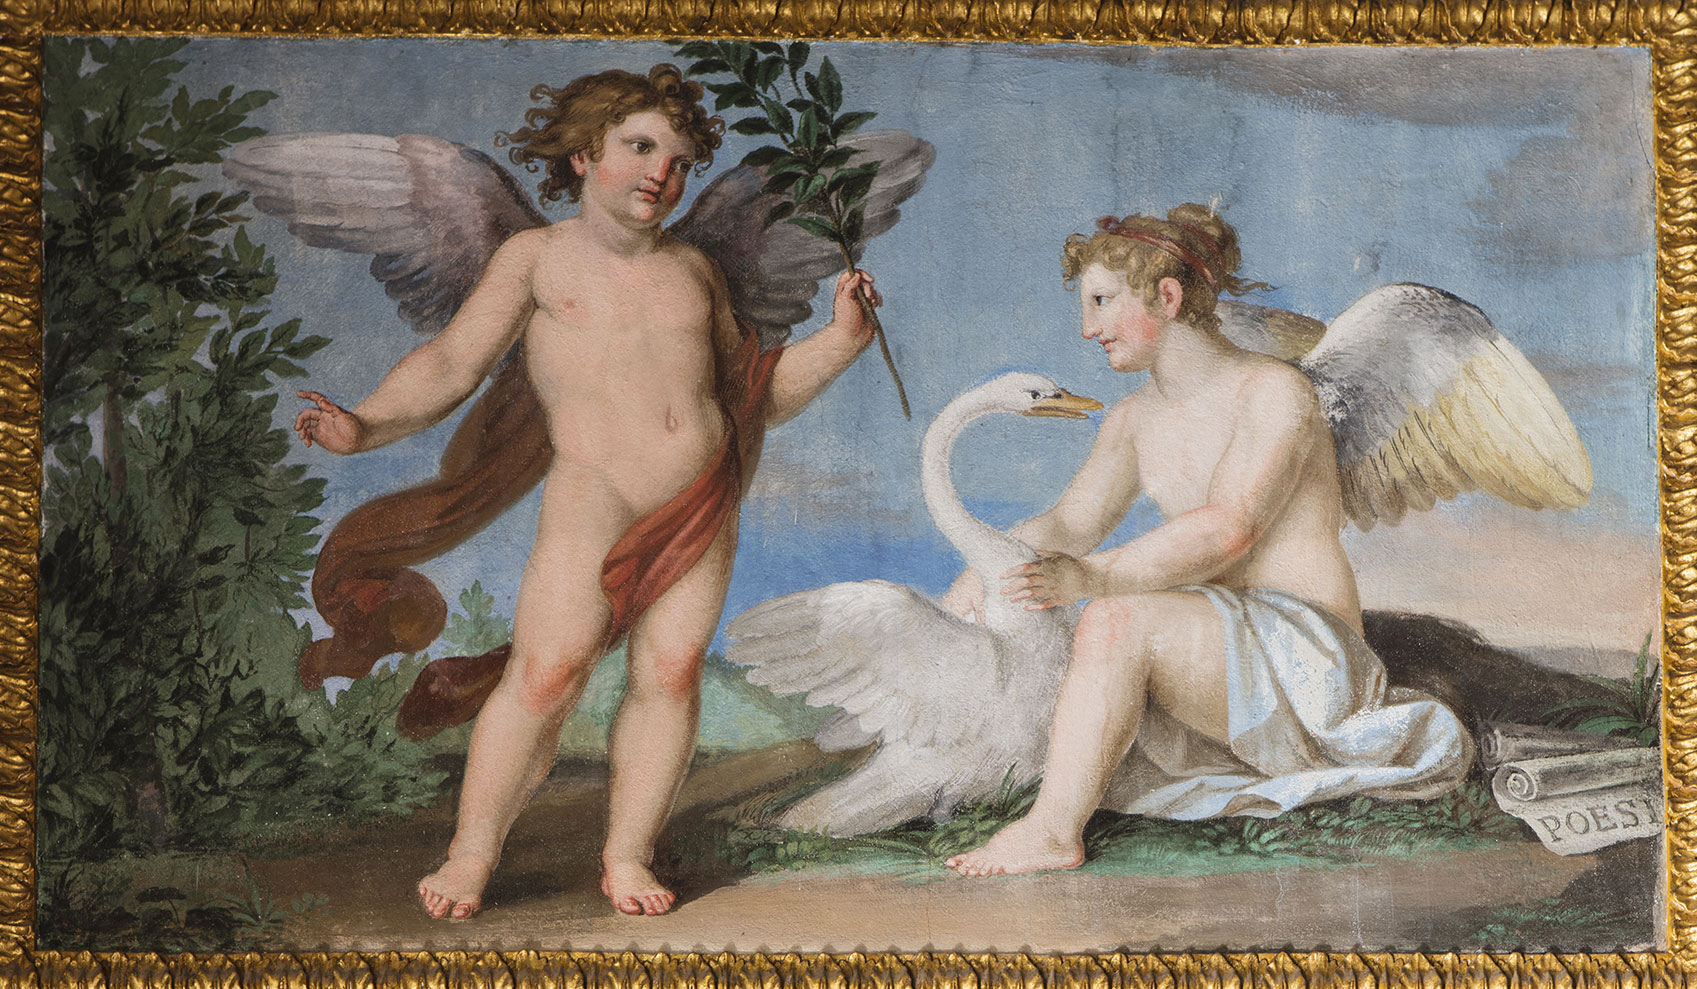 Painting exhibited in the Sovereign's Study, illustrates the mythological tale about Apollo who tames History seated at his feet listening to the words of God